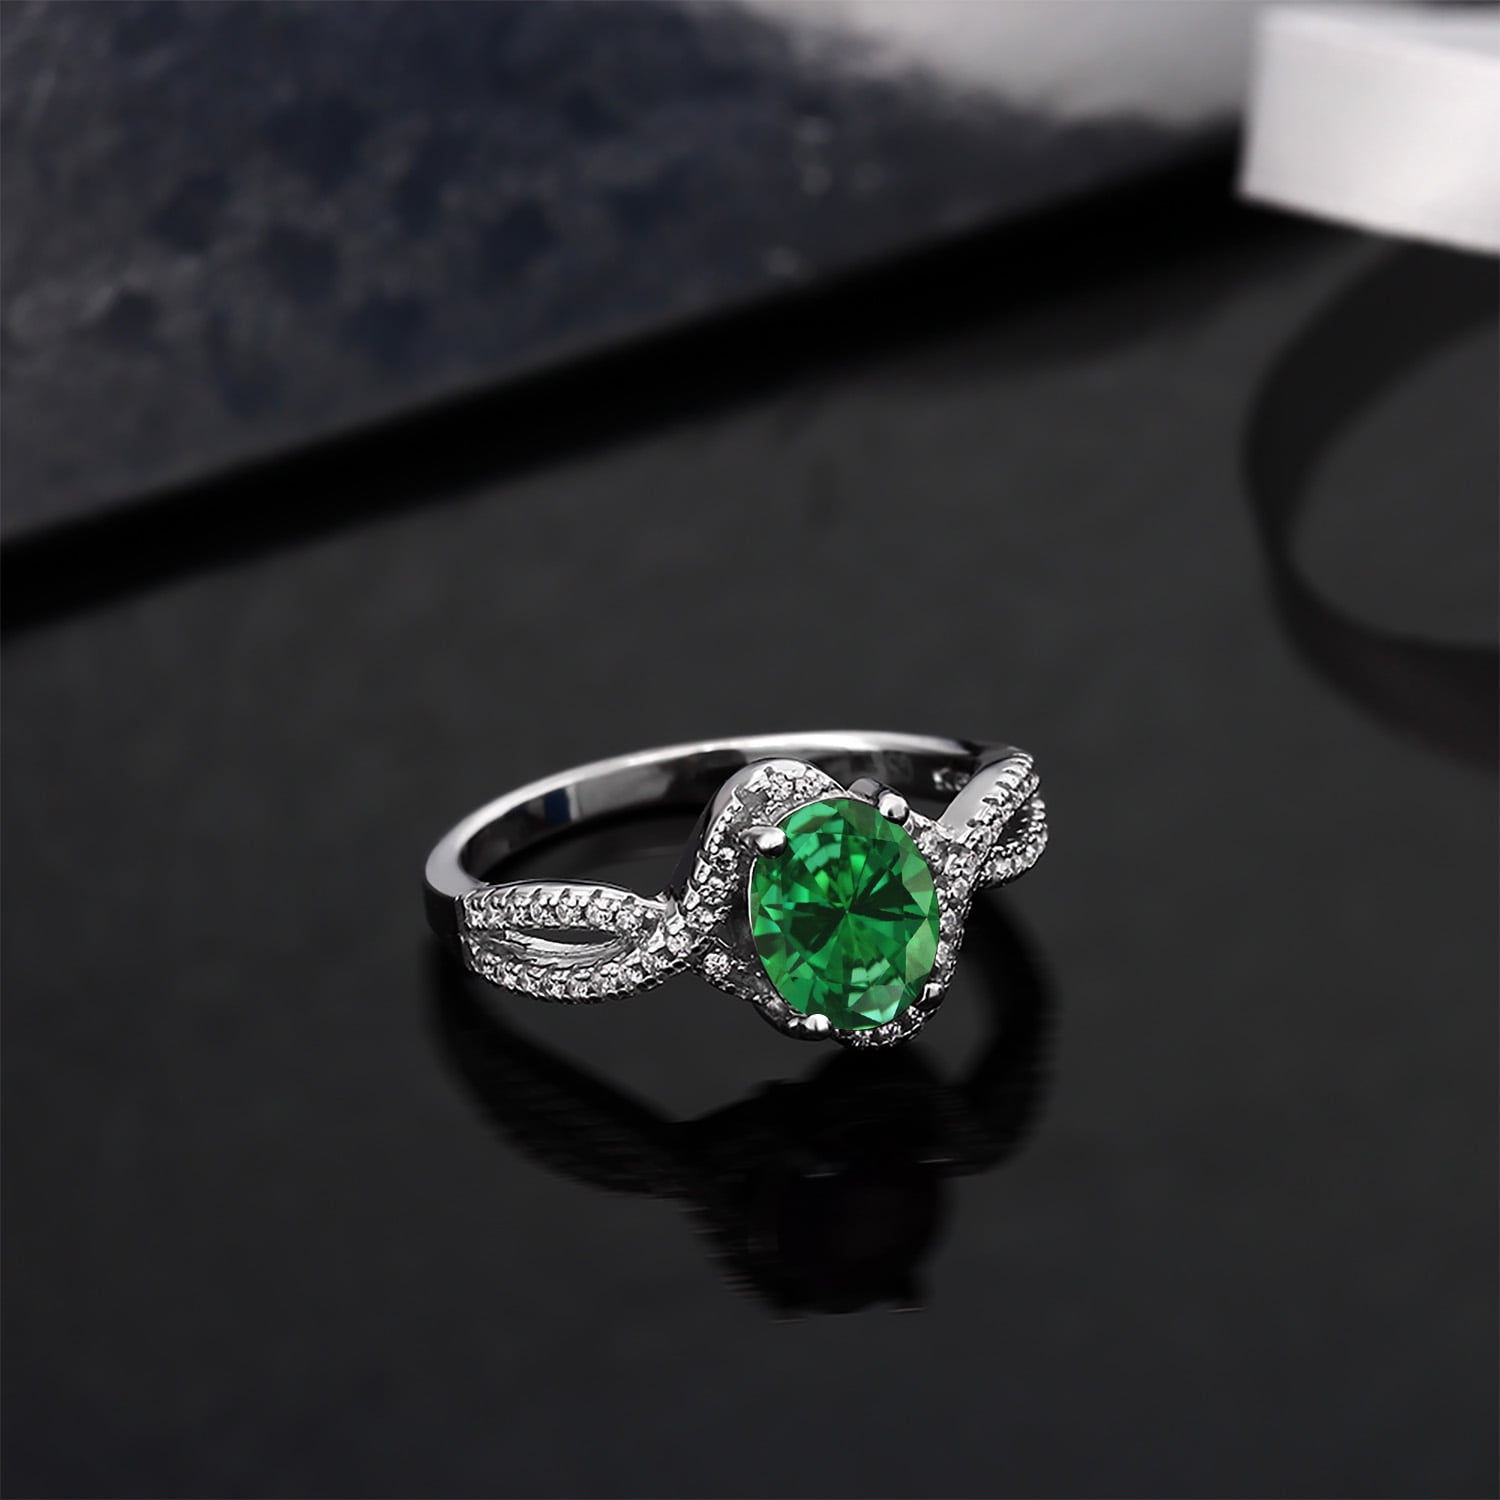 Gem Stone King 925 Sterling Silver Green Simulated Emerald Women Ring 2.68 Ct Oval 8X6MM, Available in size 5, 6, 7, 8, 9